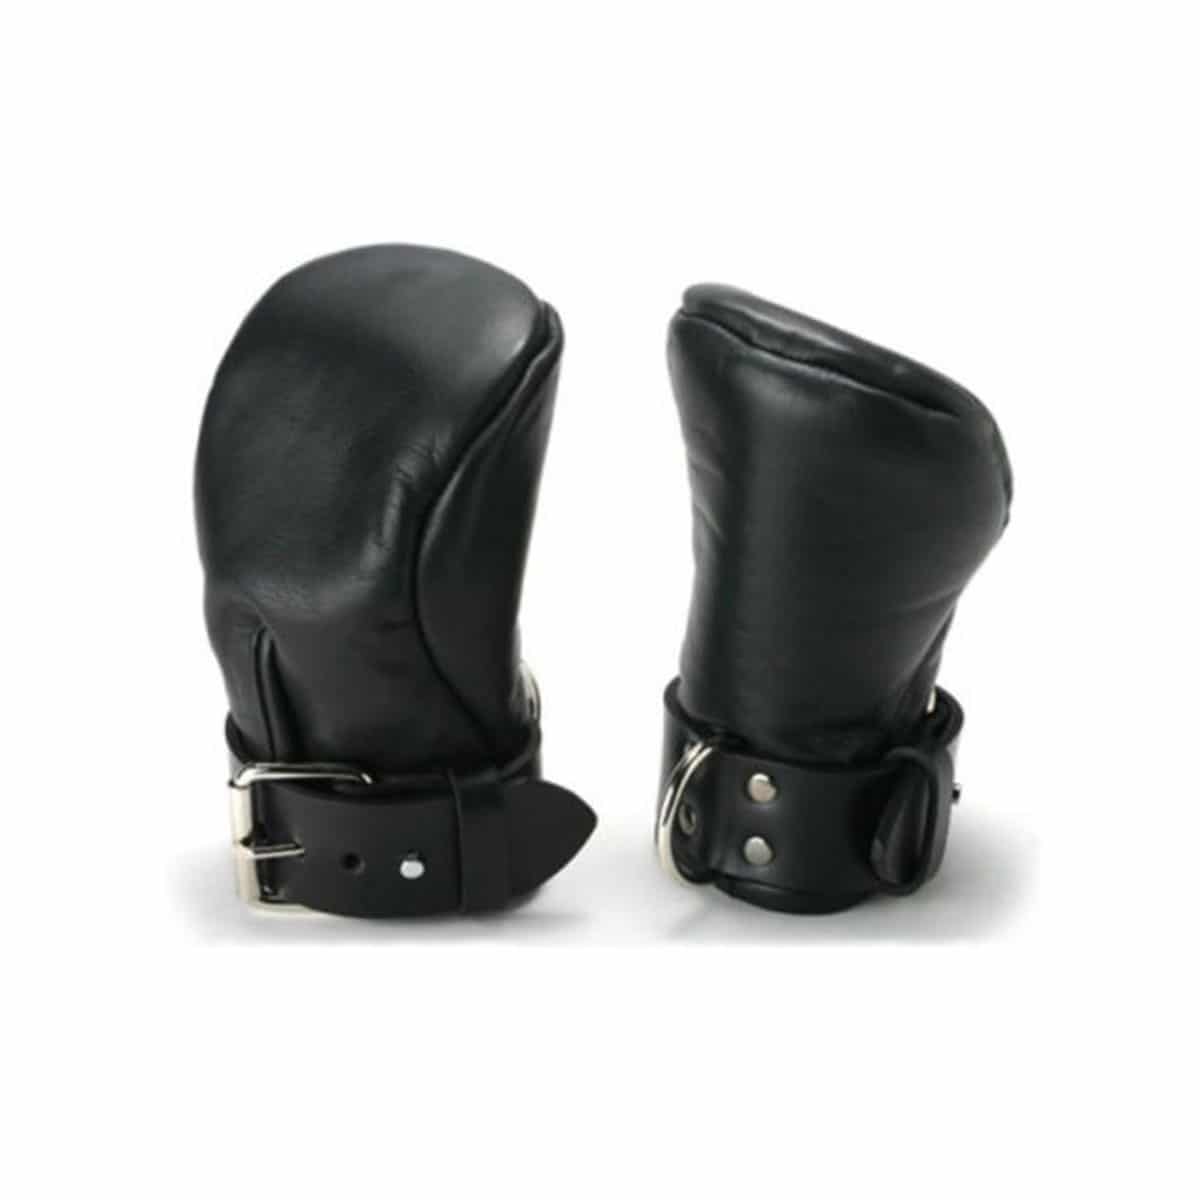 Unisex Black Leather Padded Mitts - Mitts3